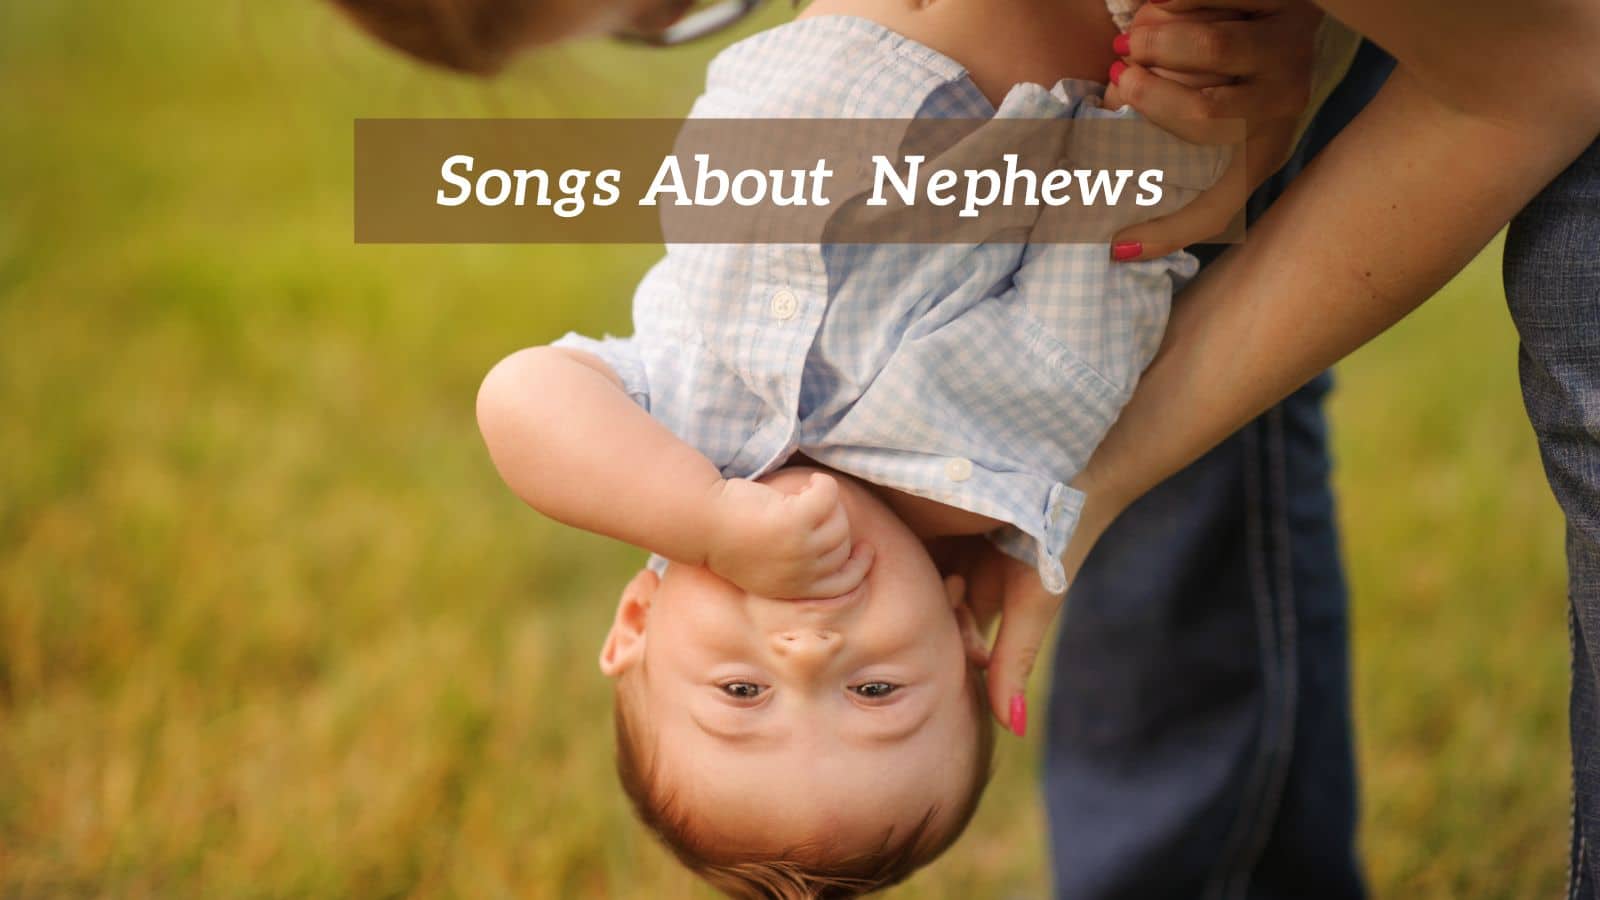 Songs About Nephews